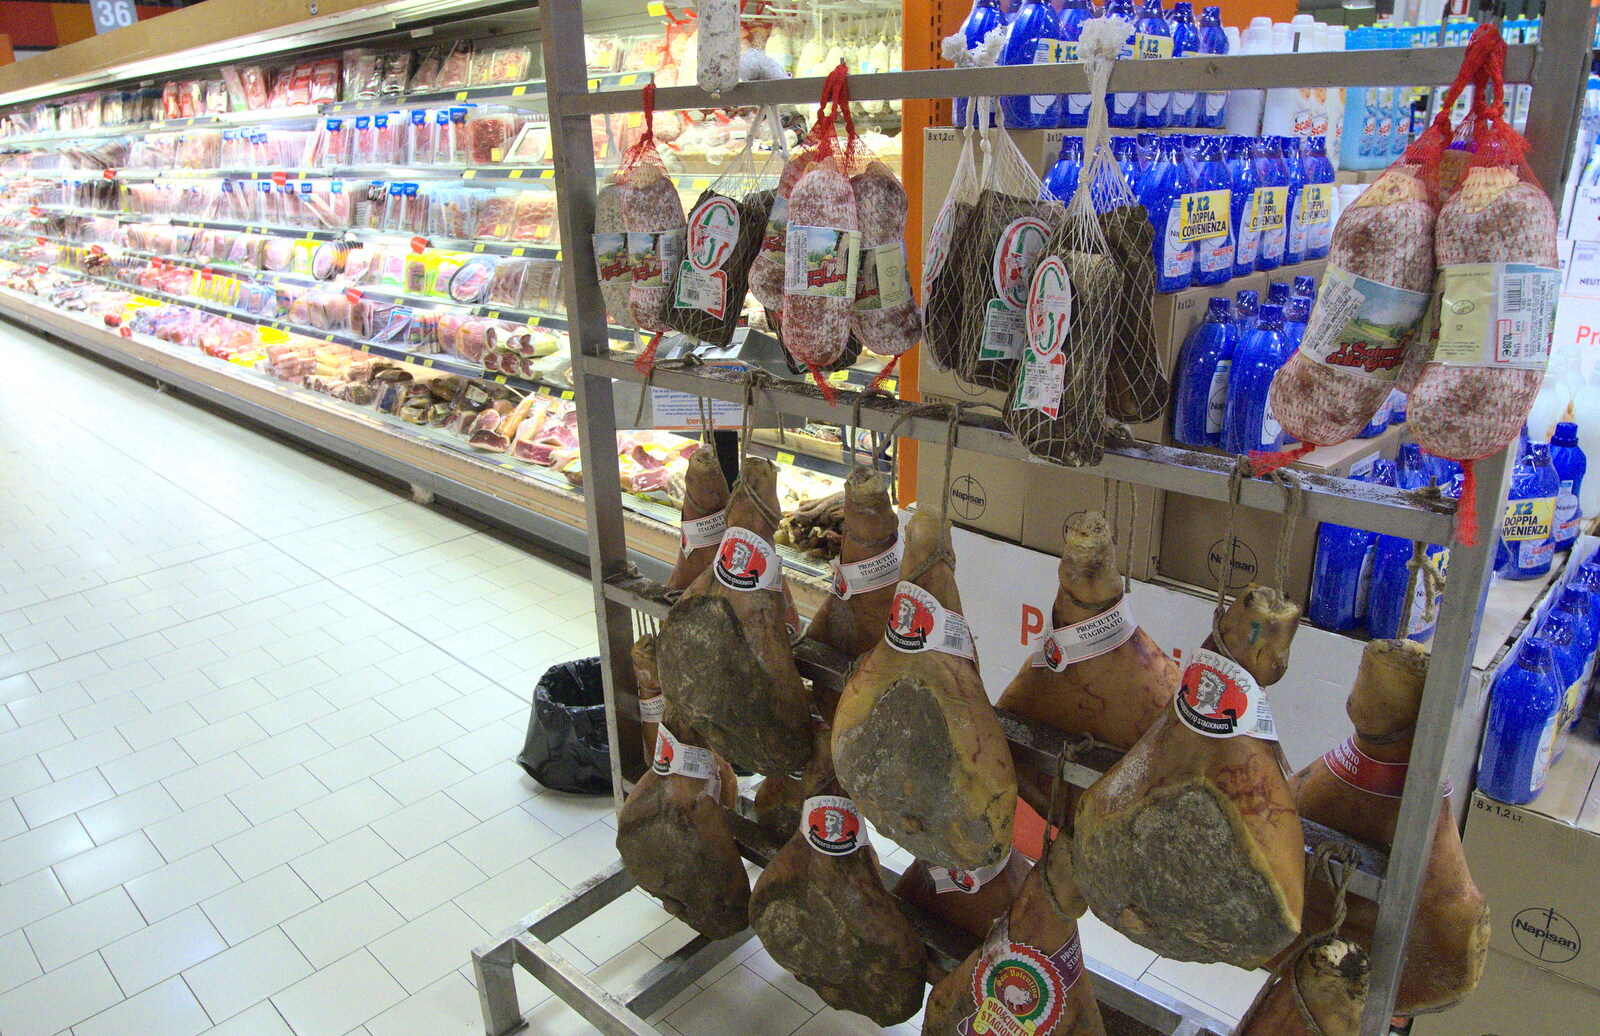 Whole hanging proscuitto hams from Italian Weddings, Saracens and Swimming Pools, Arezzo, Tuscany - 12th June 2013